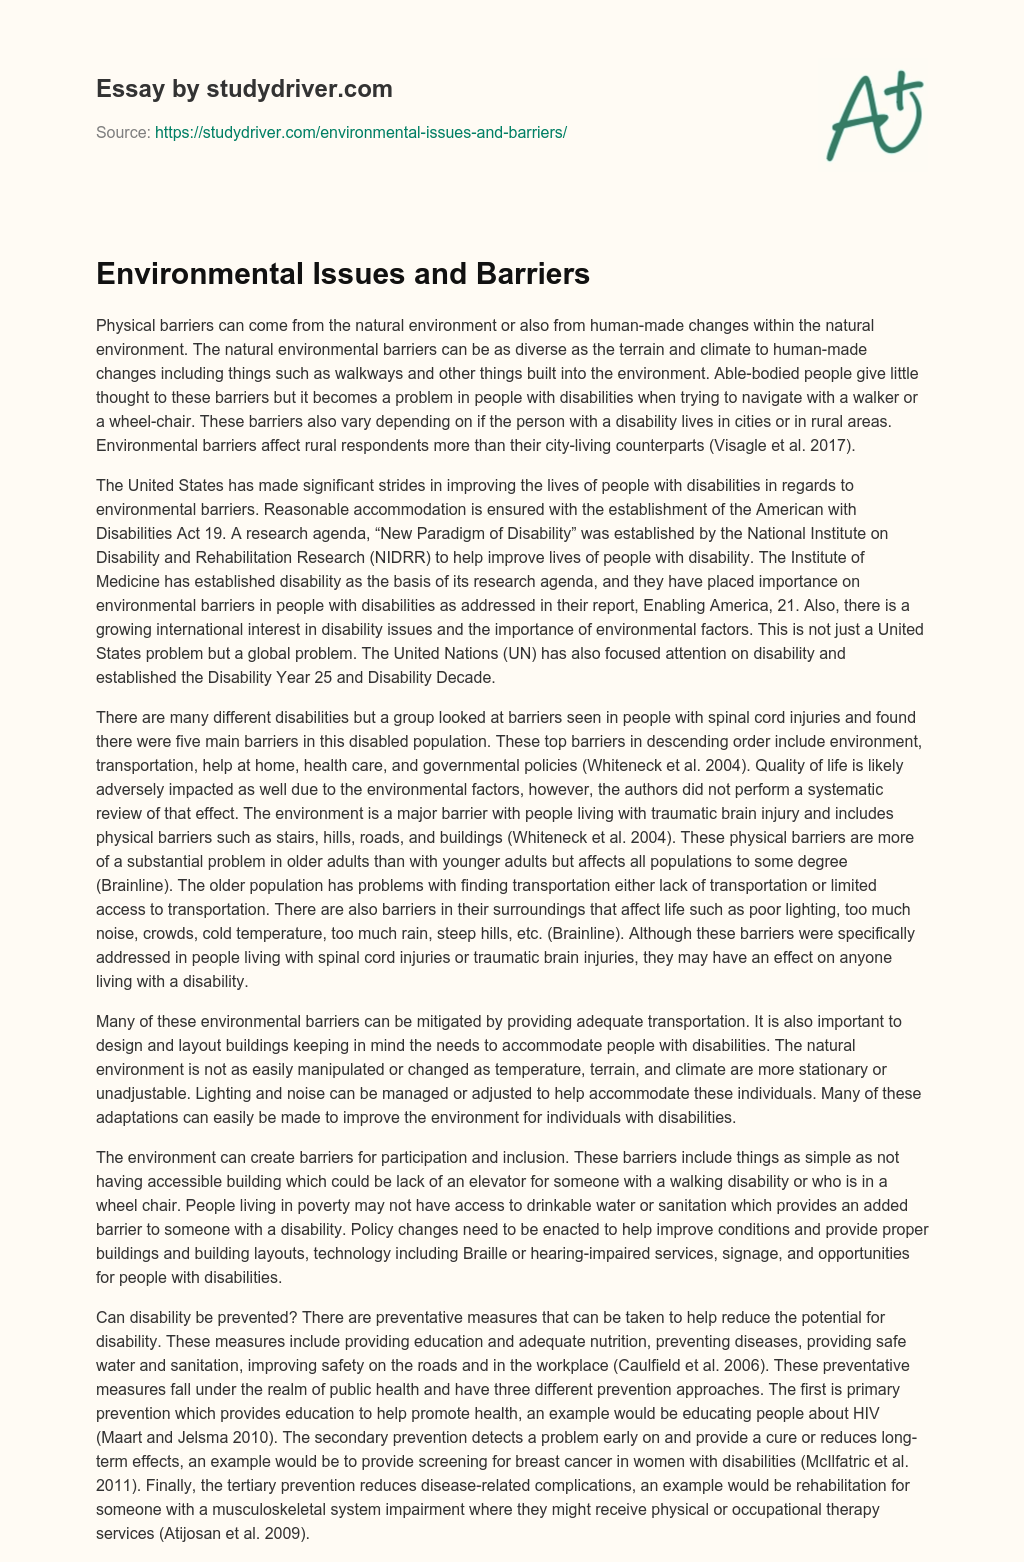 Environmental Issues and Barriers essay